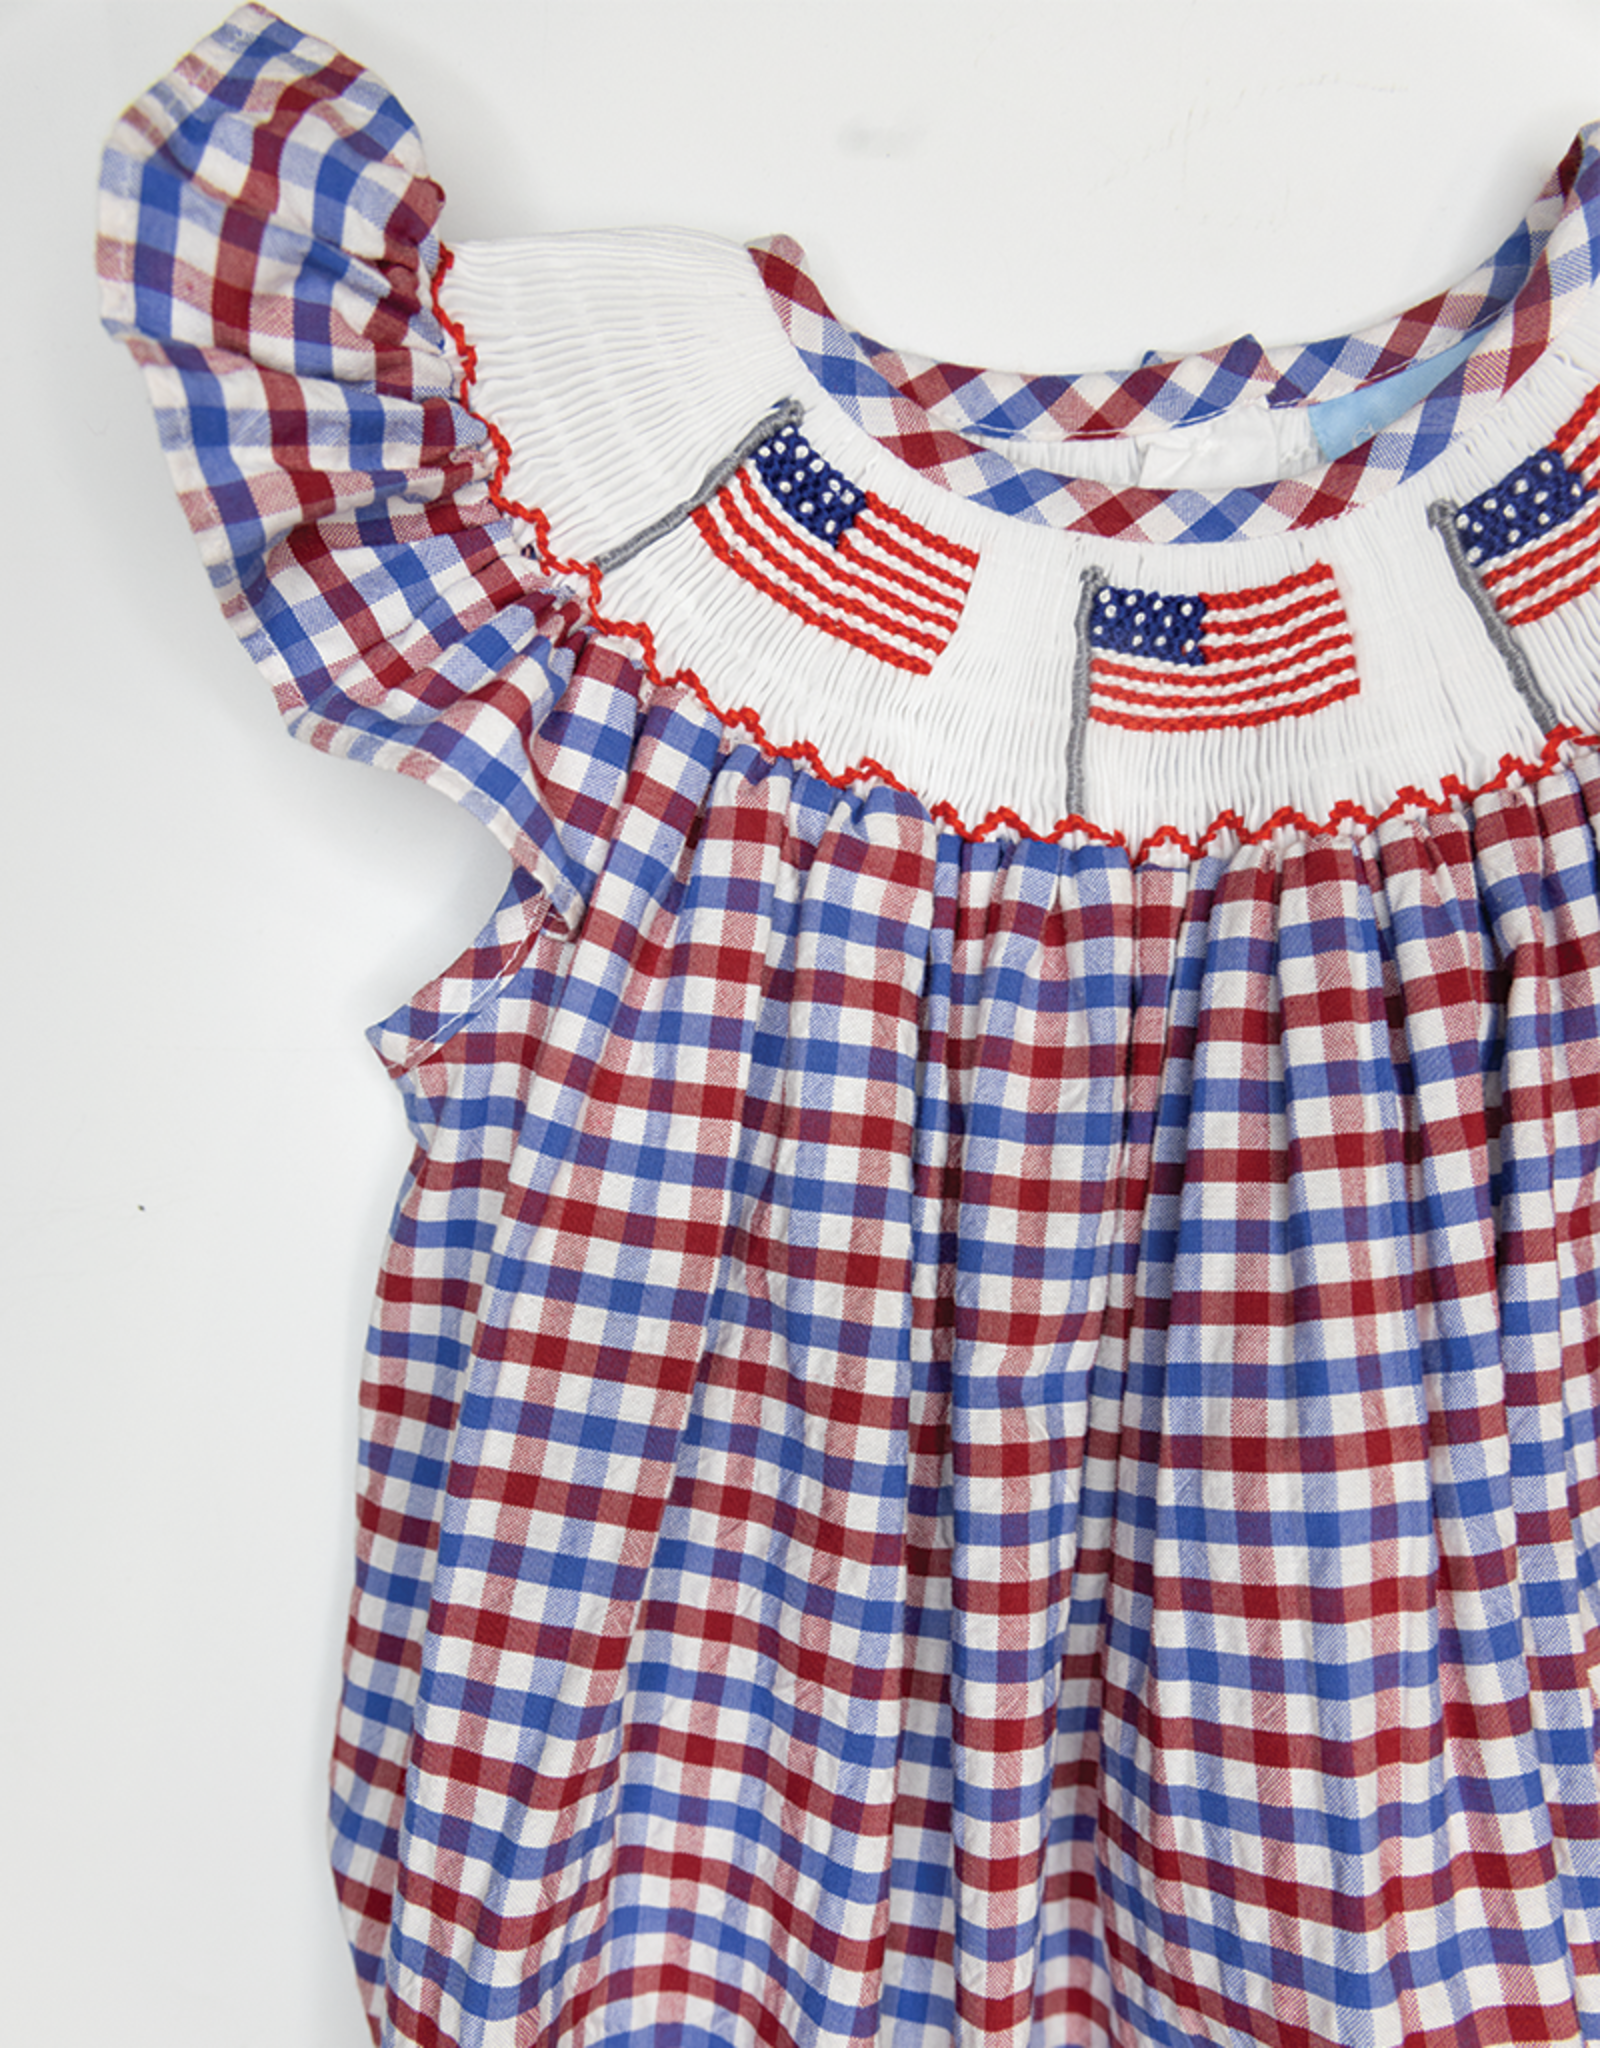 Charming Little One GQ1329 Patriotic Zoey Bubble